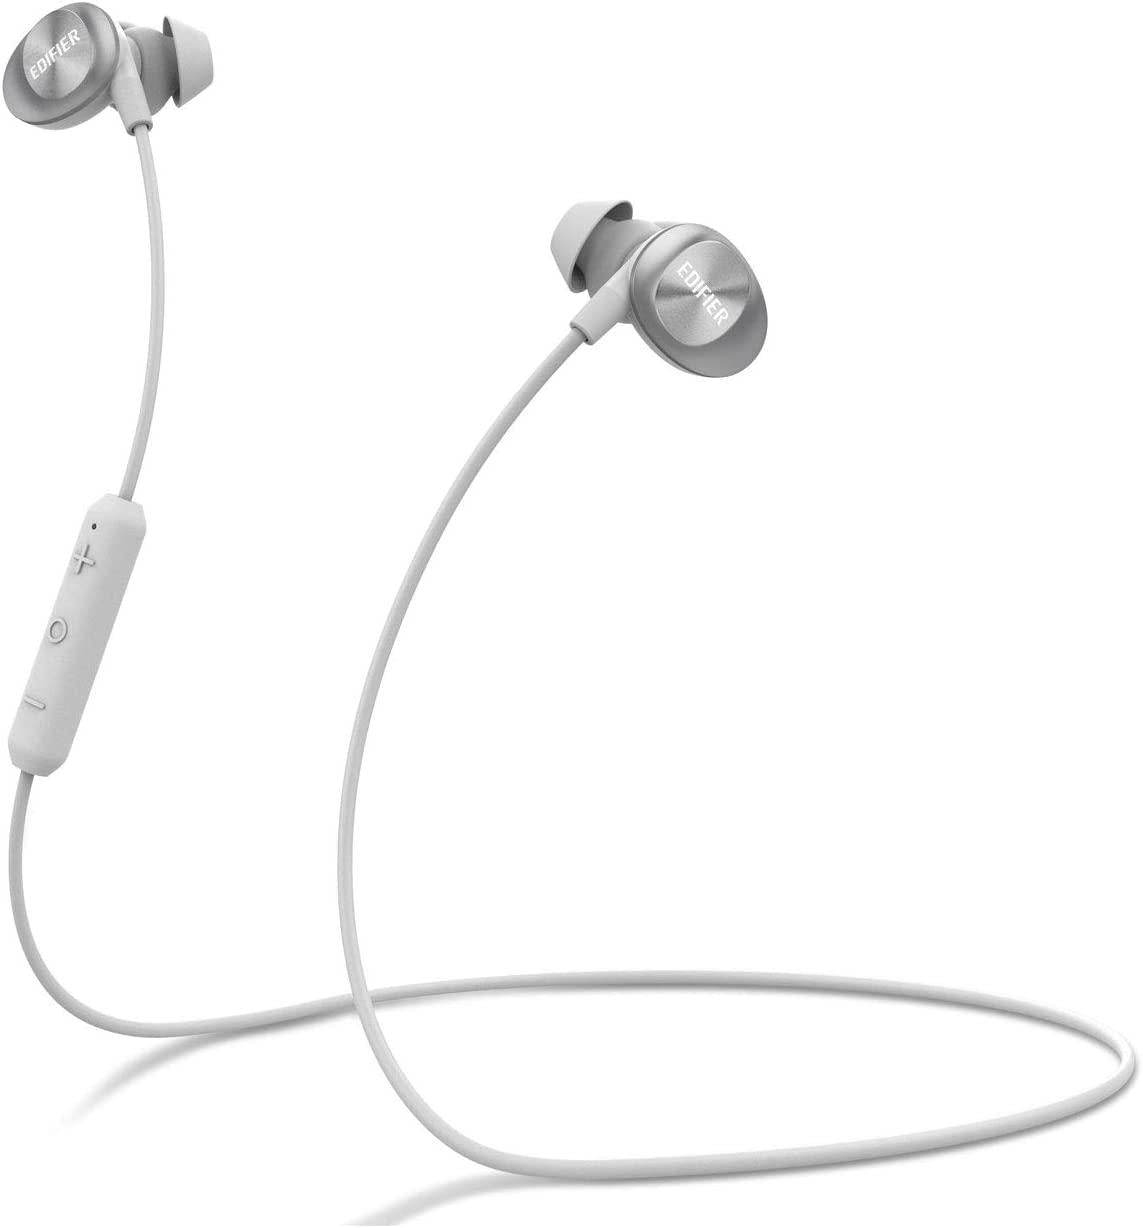 Edifier, Edifier W285BT Bluetooth Headphones -Wireless Magnetic Earbuds IPX4 in-Ear Sports Stereo Earphones with AAC Support, Built-in Mic - White